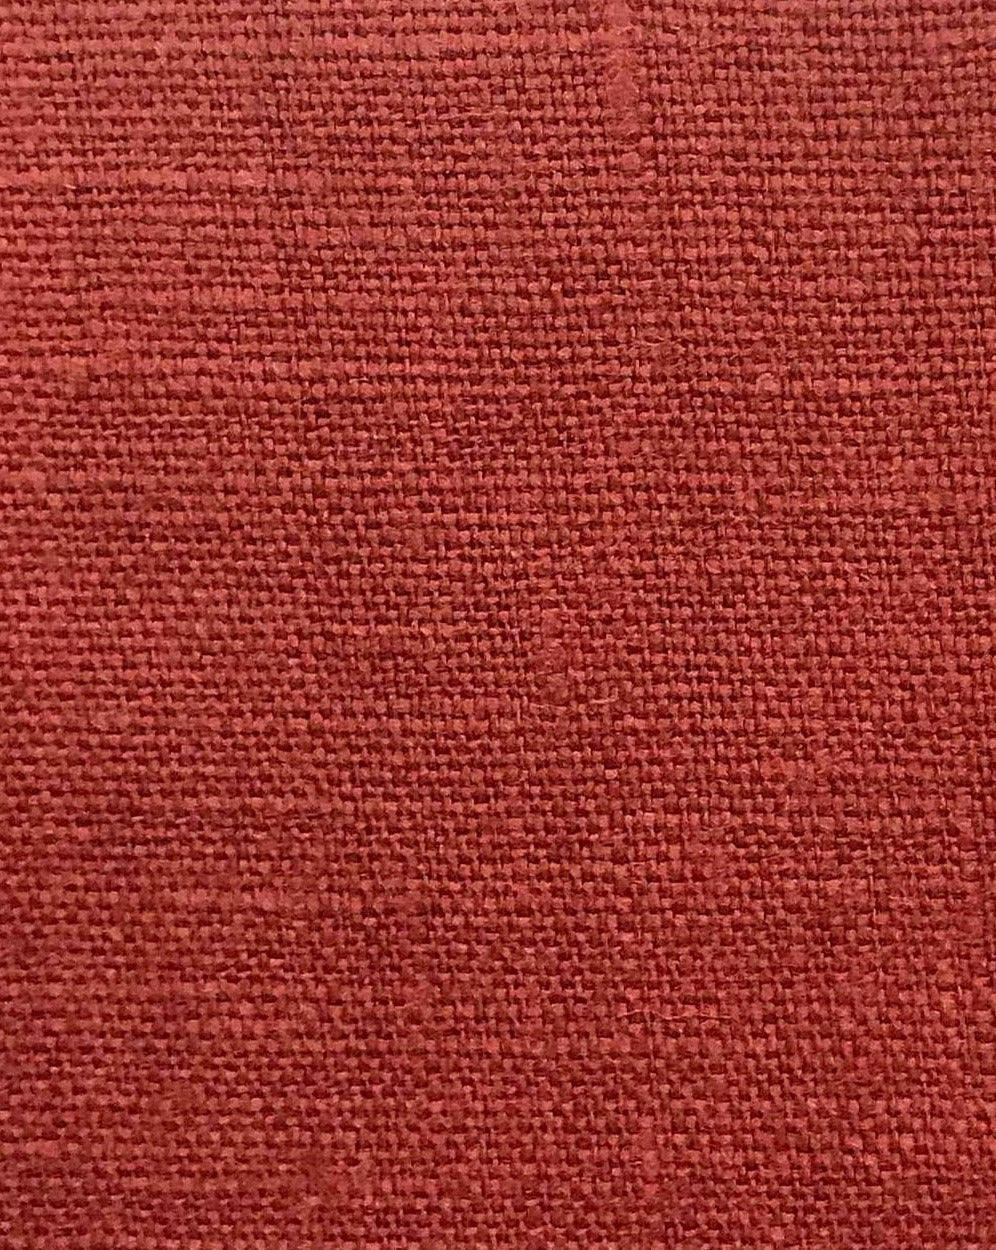 TUSCANY RUBY-(EUROPEAN LINEN) 100% LINEN FABRICS 7.5 OZ . DYED & FINISHED IN USA